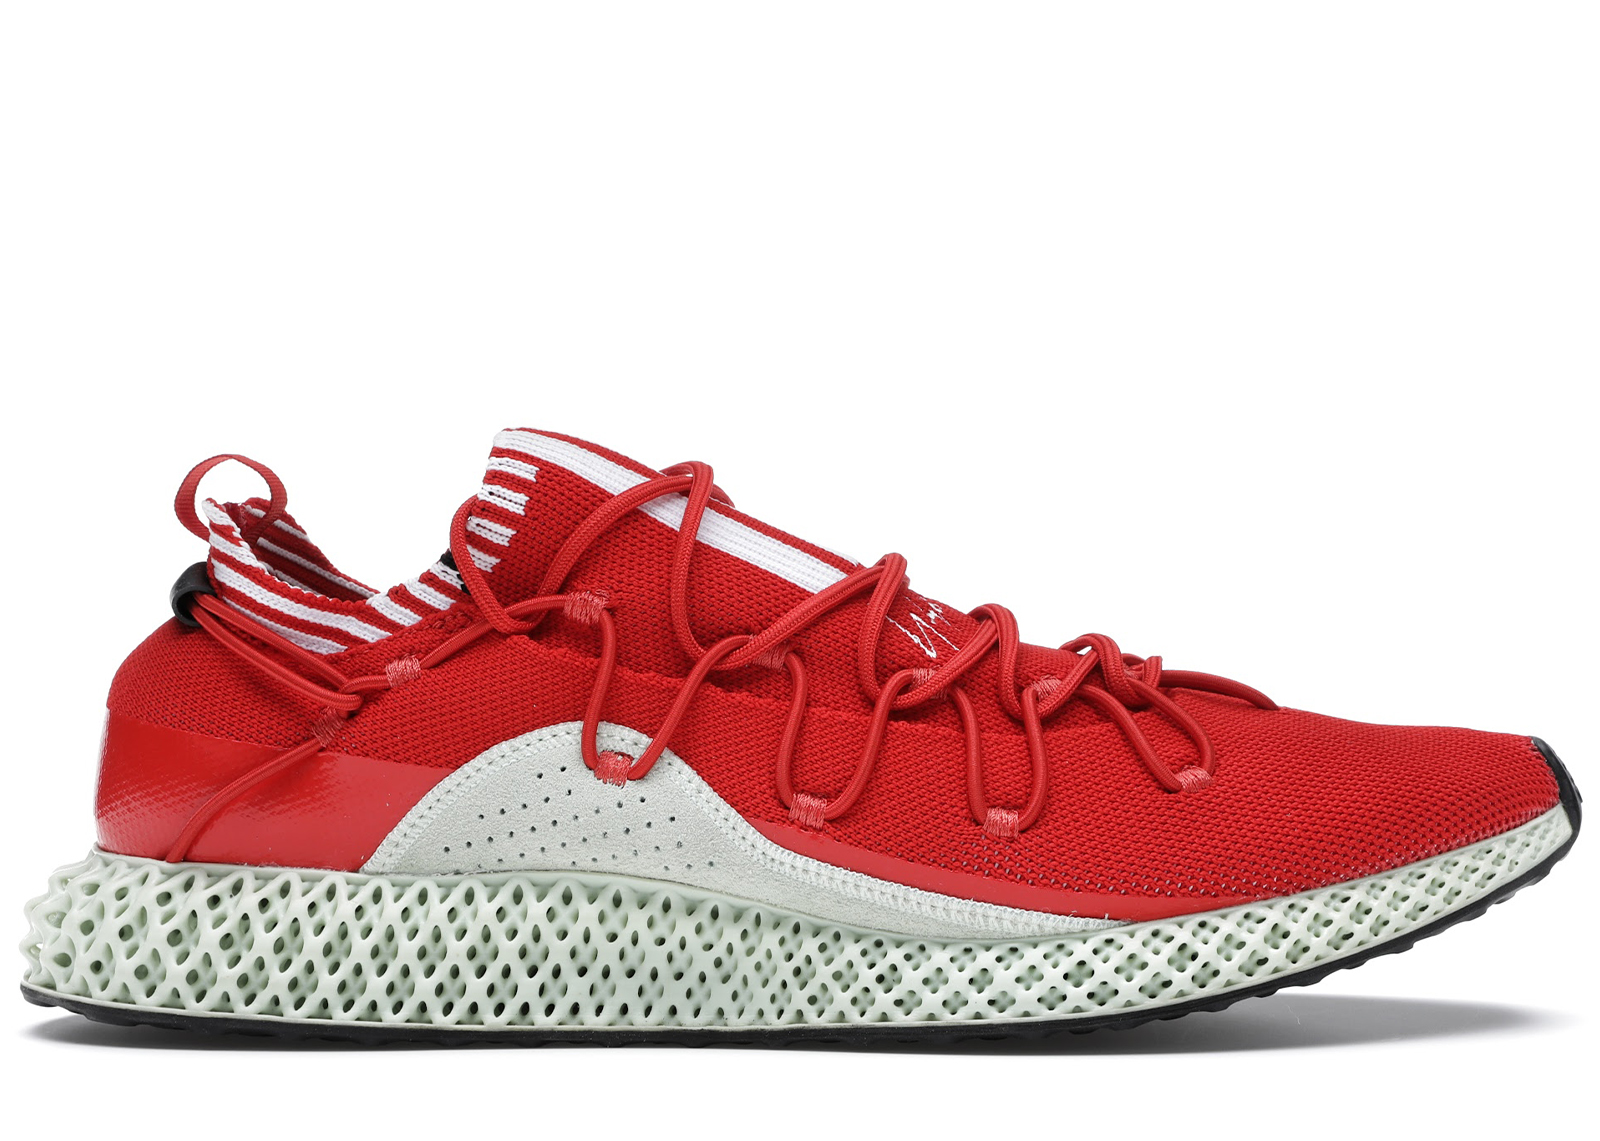 adidas Y3 Runner 4D Red - F99805